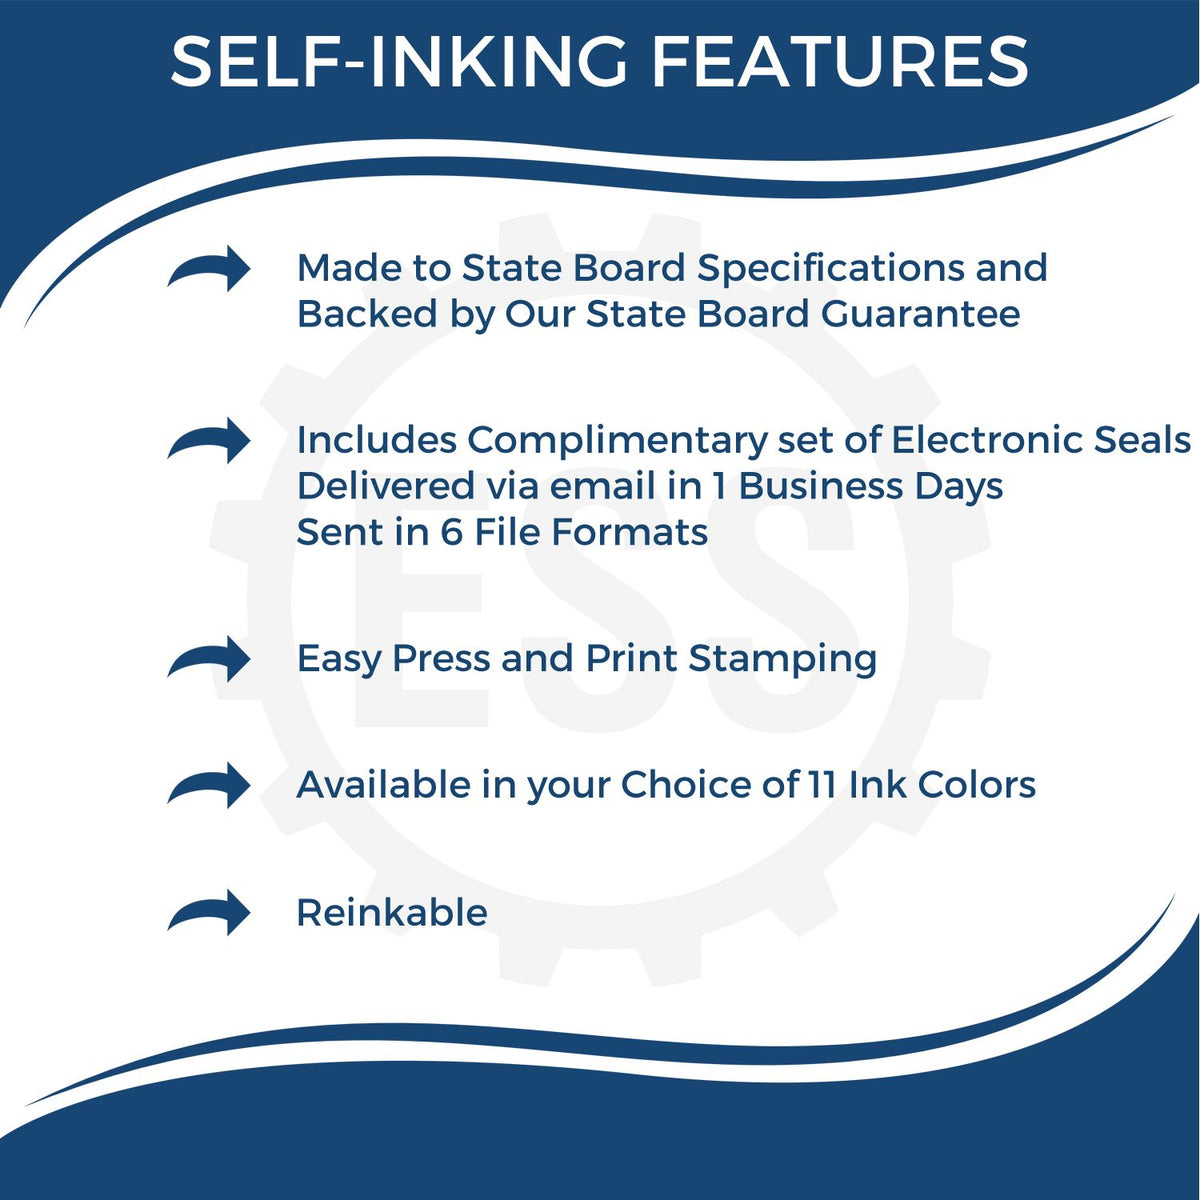 A picture of an infographic highlighting the selling points for the Self-Inking North Carolina Geologist Stamp